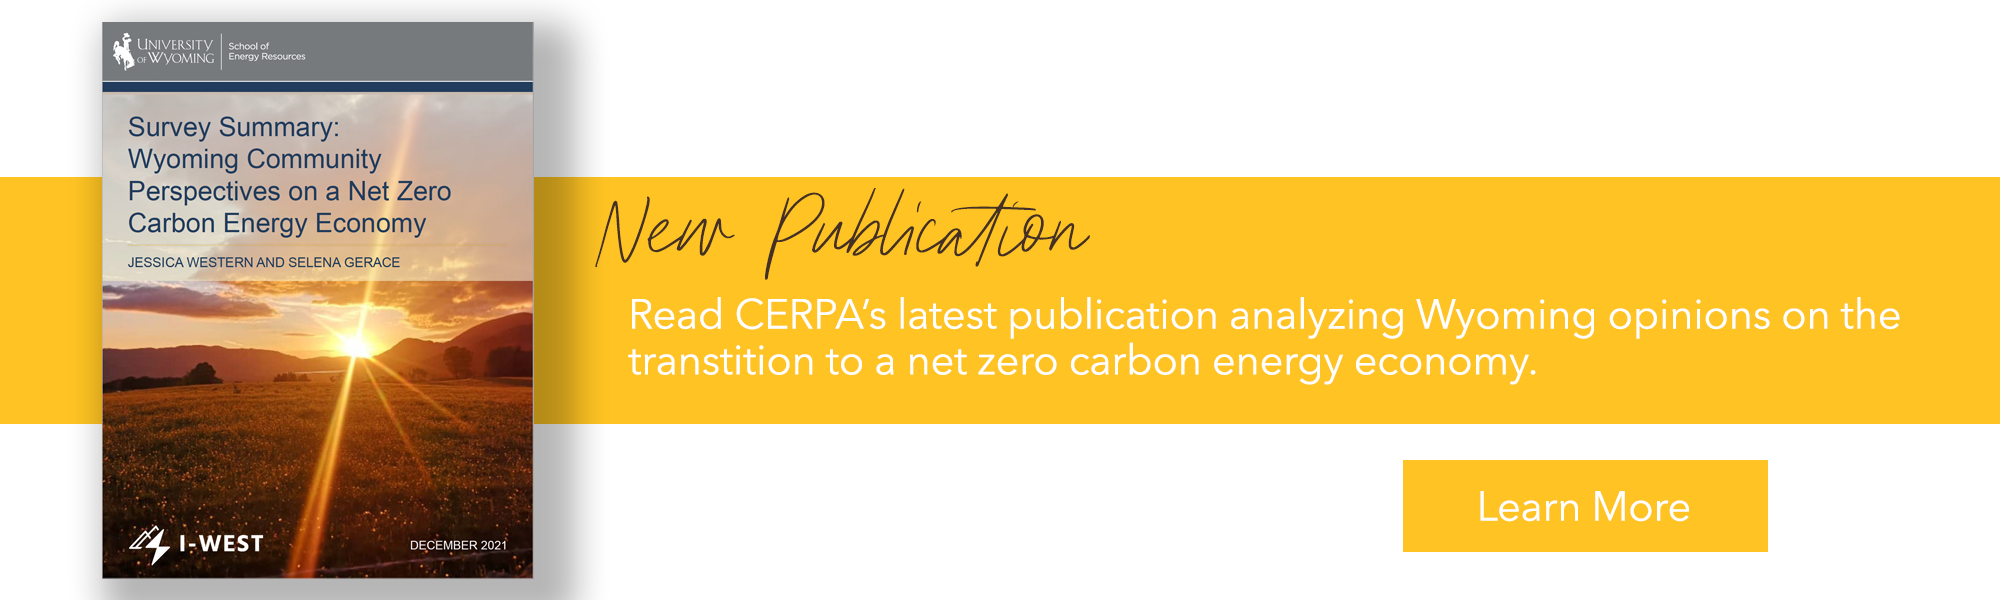 click to download the latest publication from CERPA